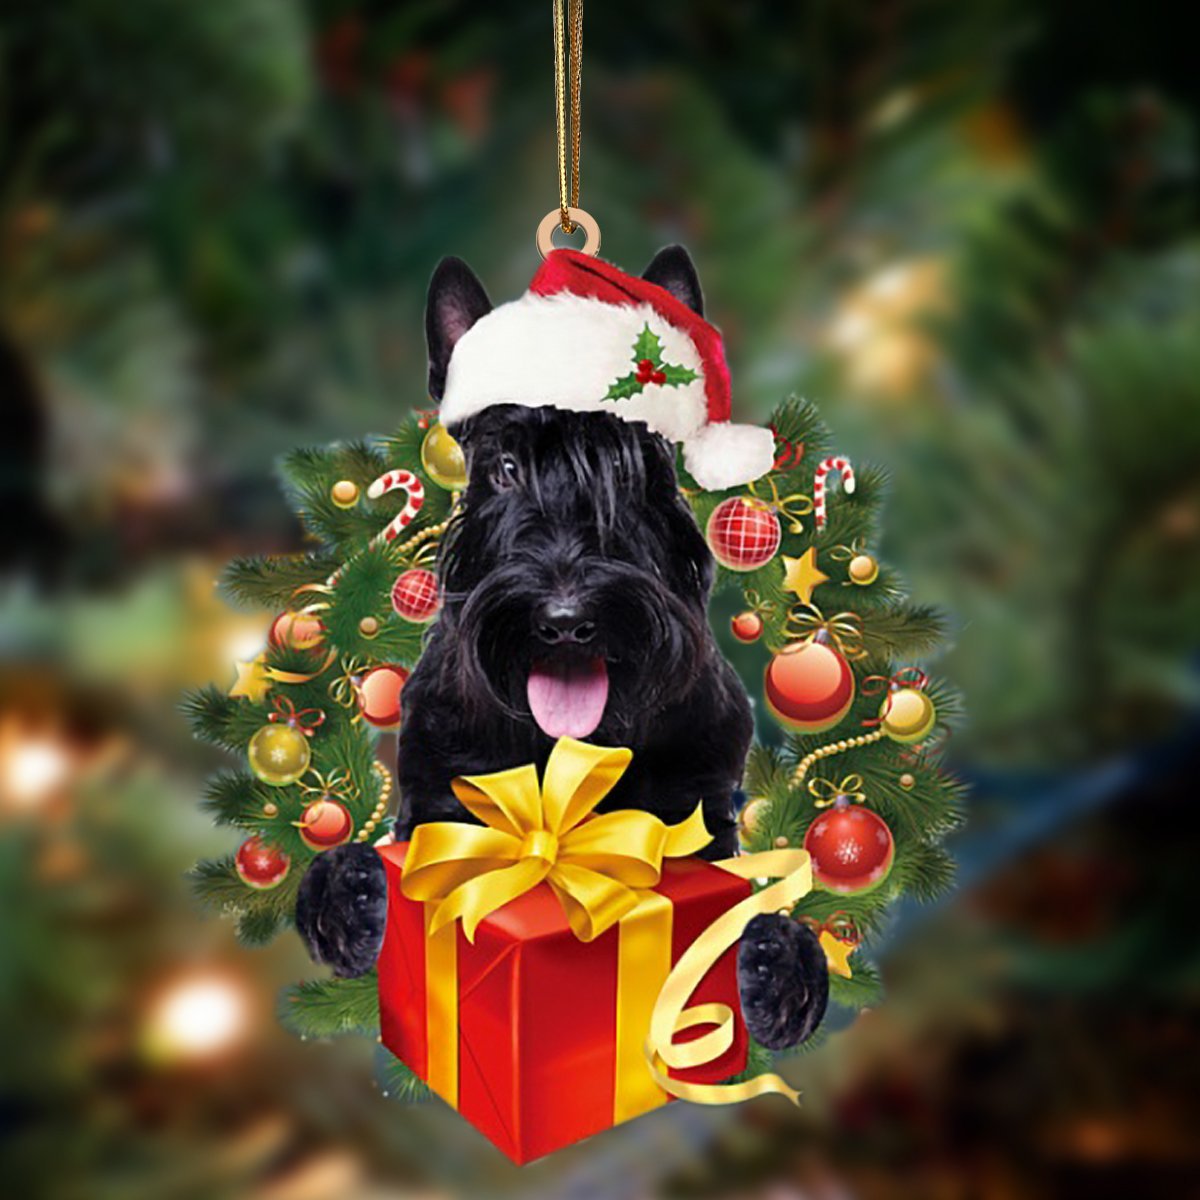 Scottish Terrier Give Gifts Hanging Ornament - Flat Acrylic Dog Ornament – Dog Lovers Gifts For Him Or Her